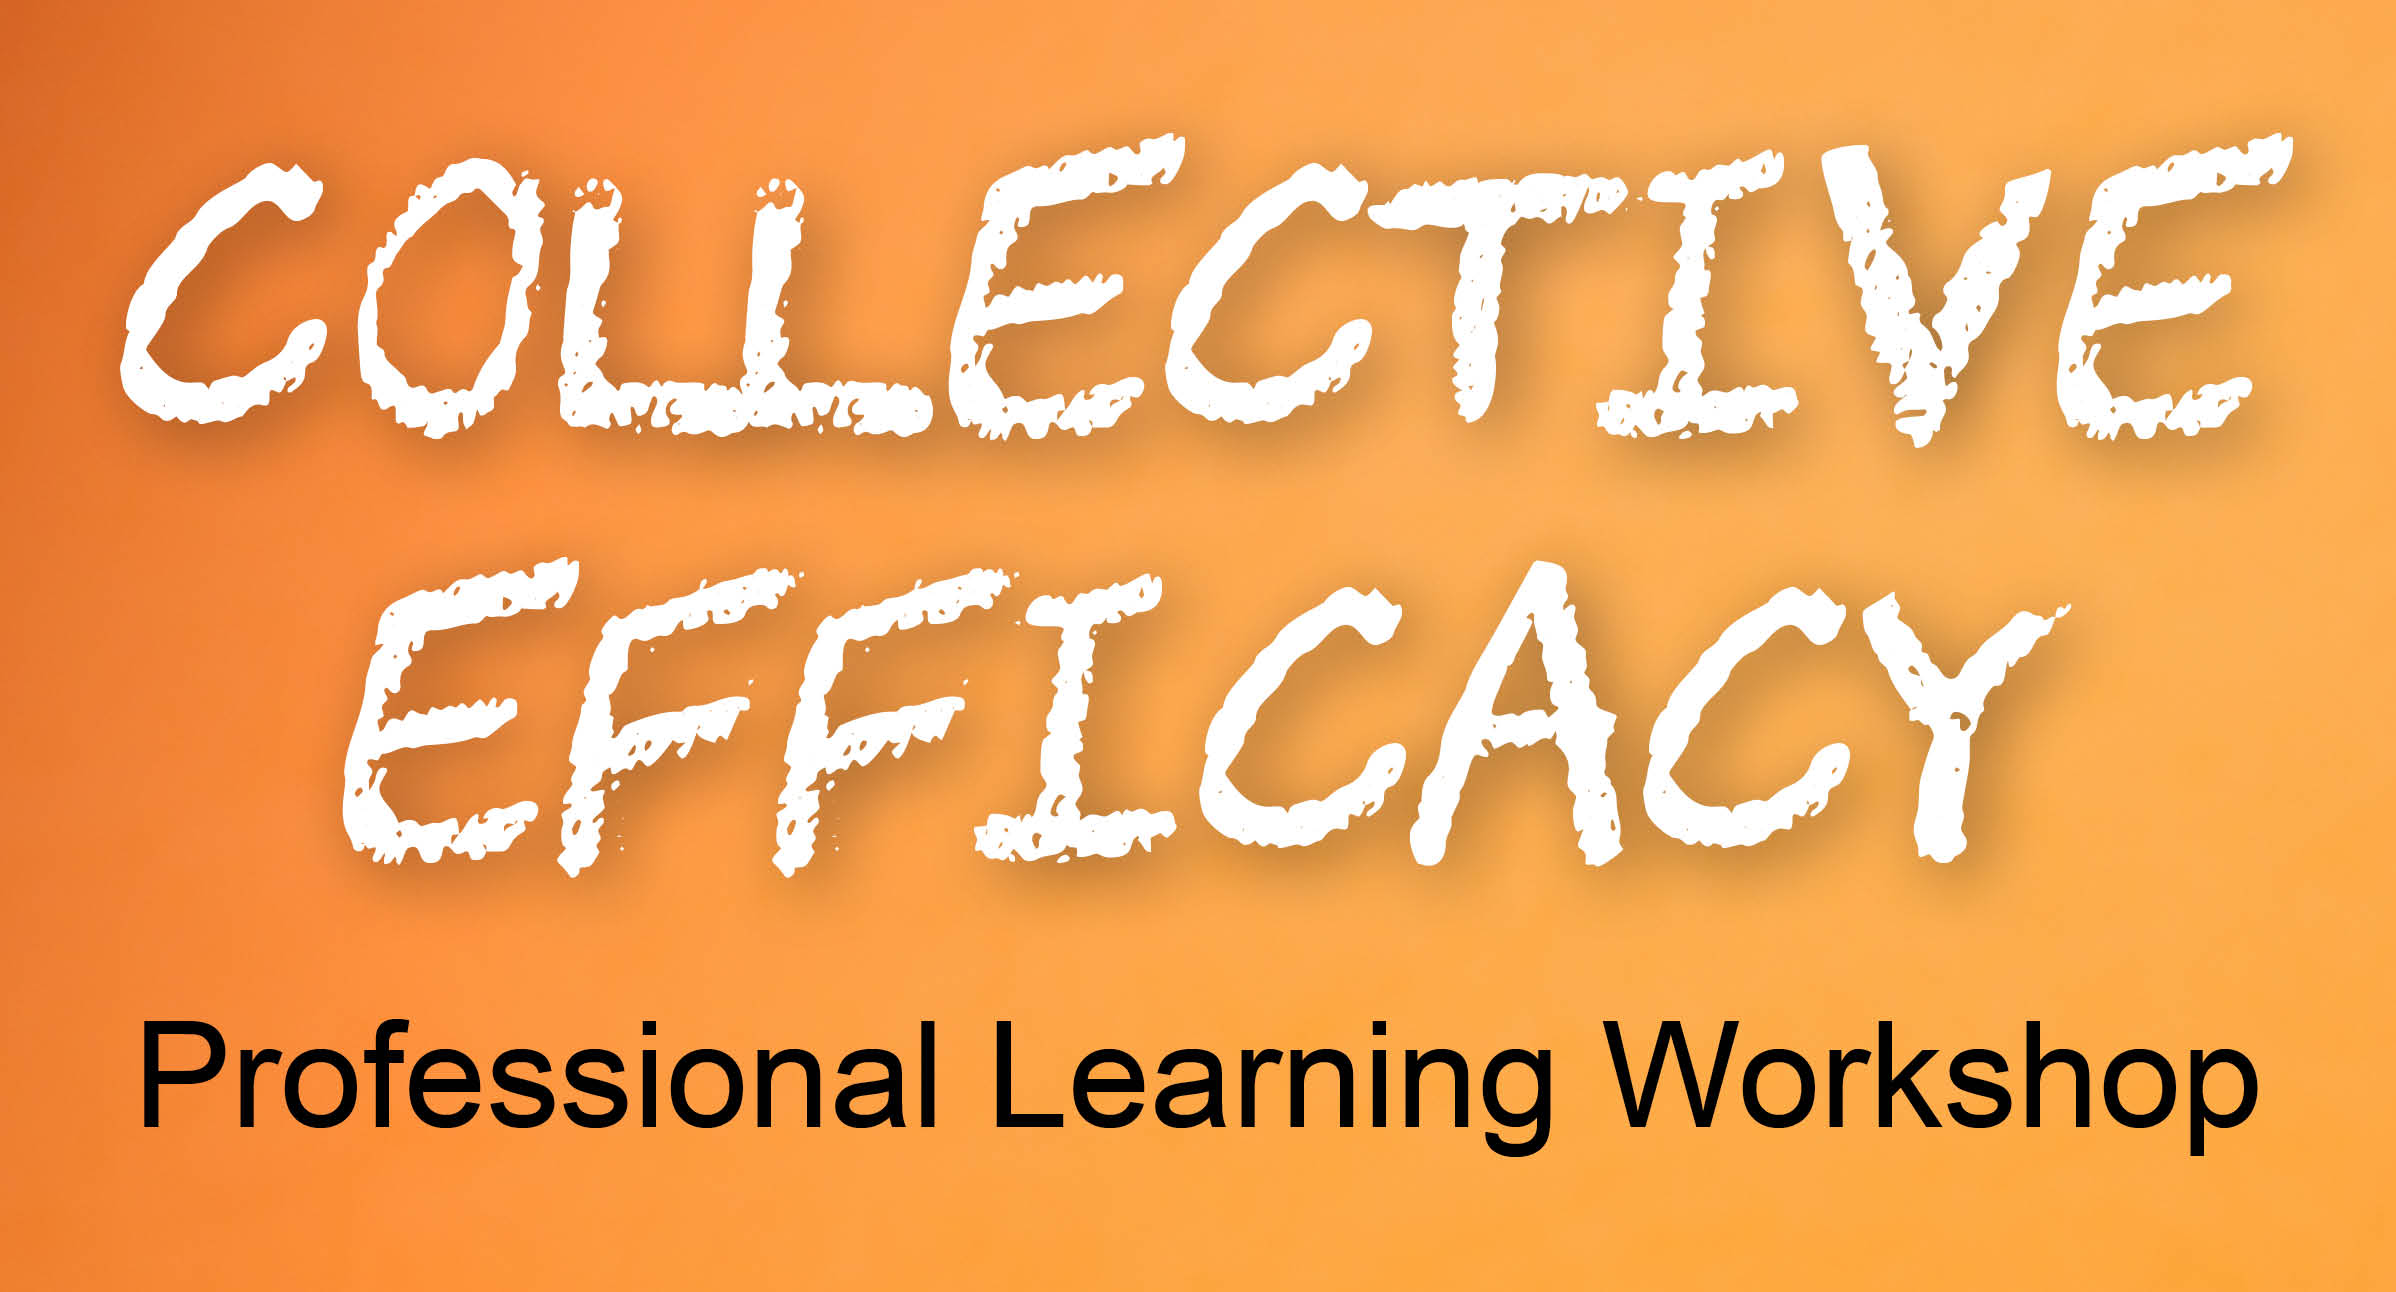 Collective Efficacy: Melbourne